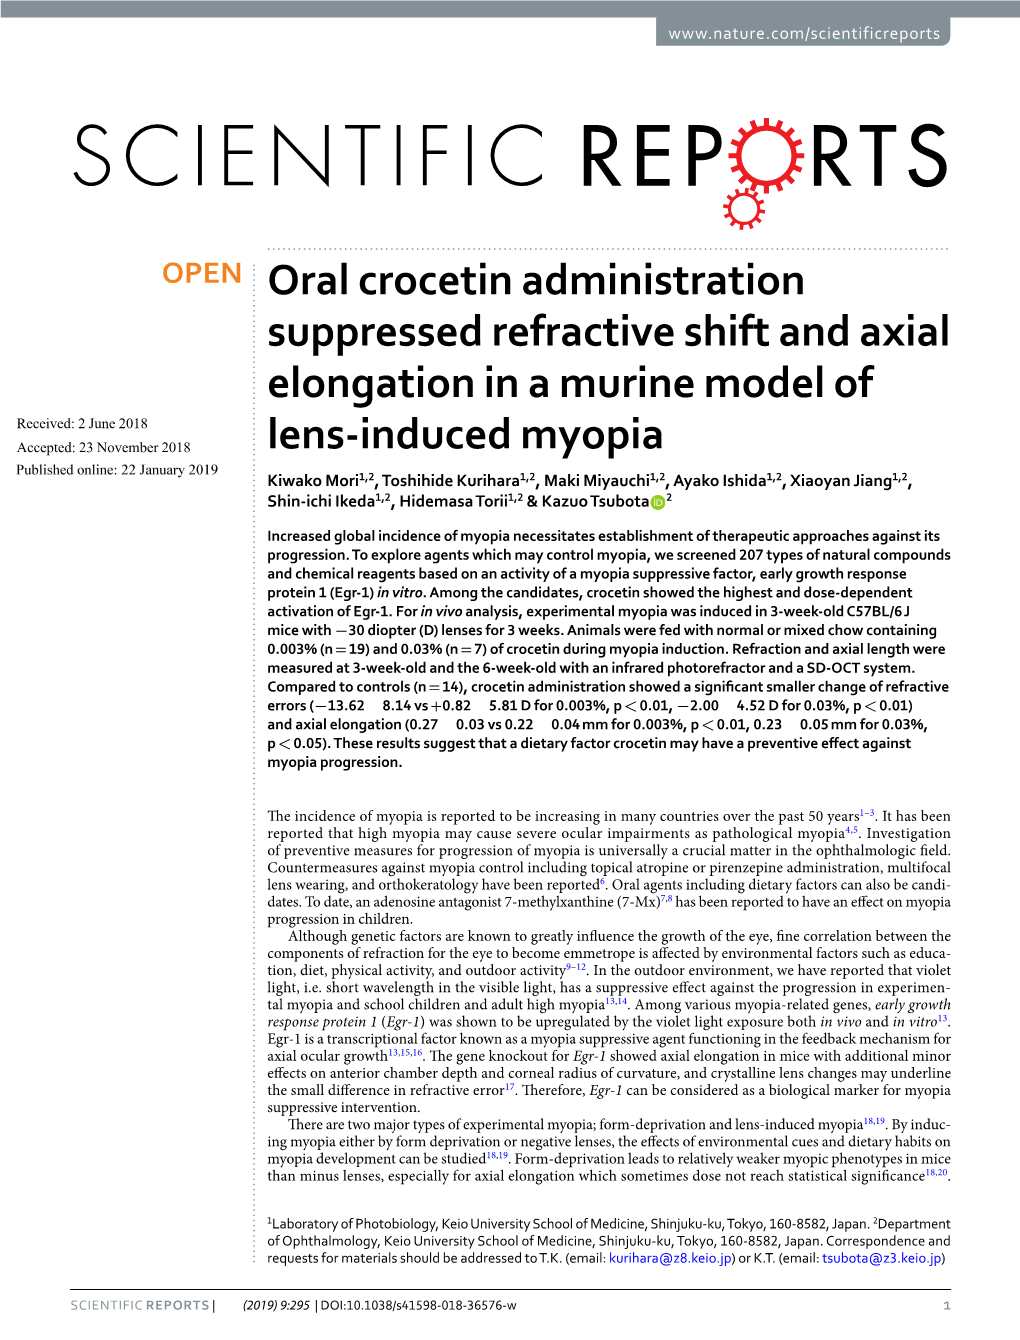 Oral Crocetin Administration Suppressed Refractive Shift and Axial